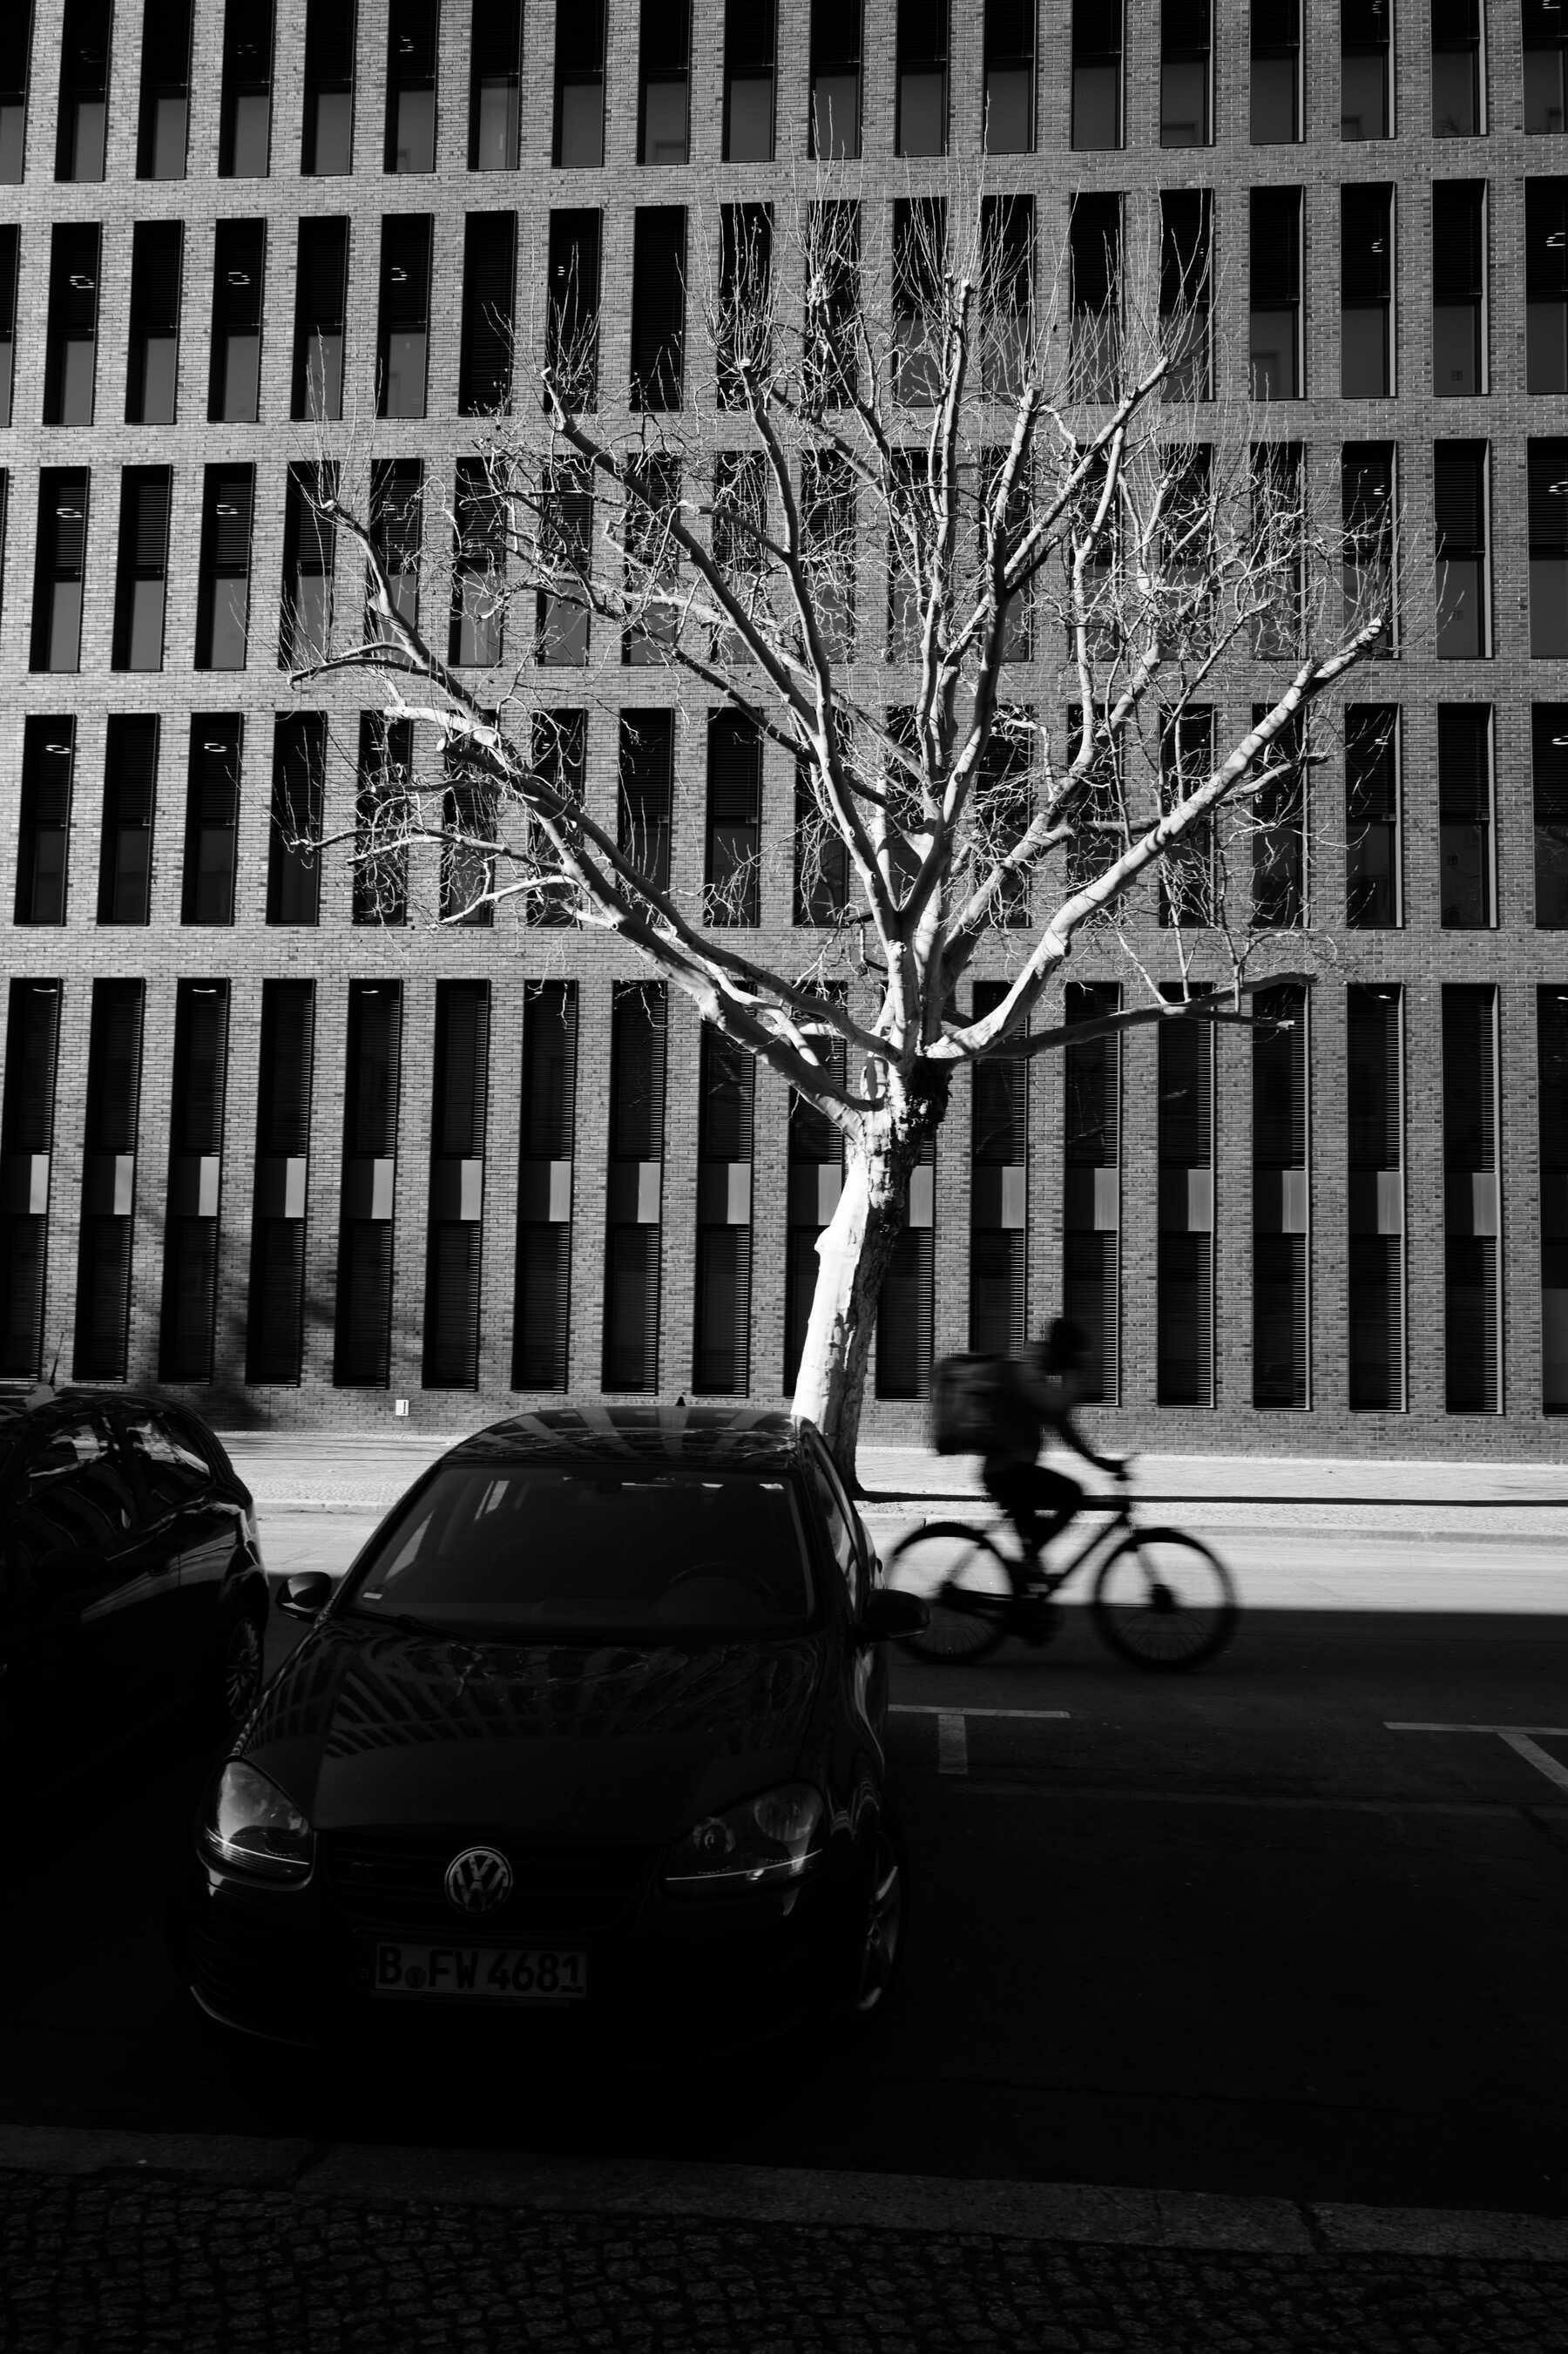 my photography - a pattern made by a building, with a tree in front of it, and a cyclist passing by, in high contrast black and white